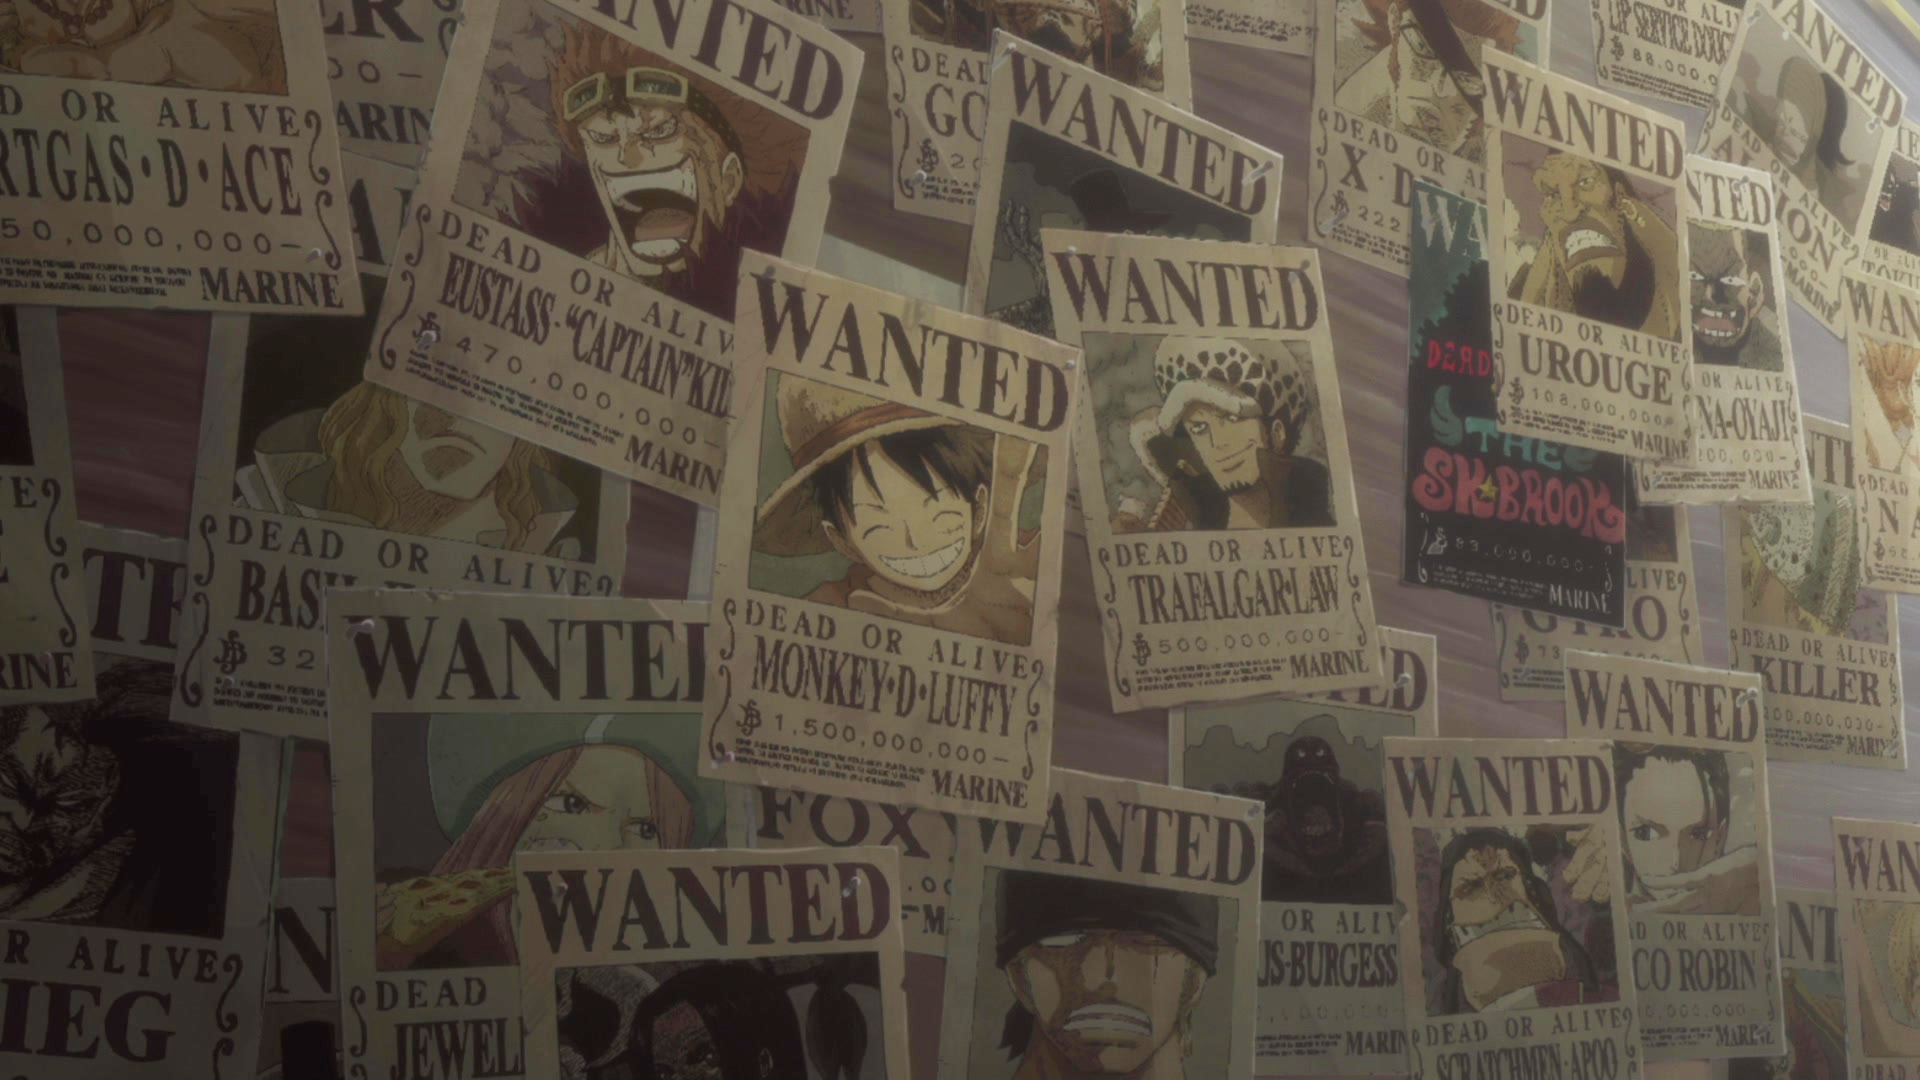 Luffy's Bounty after Wano is going to surpass both Big Mom and